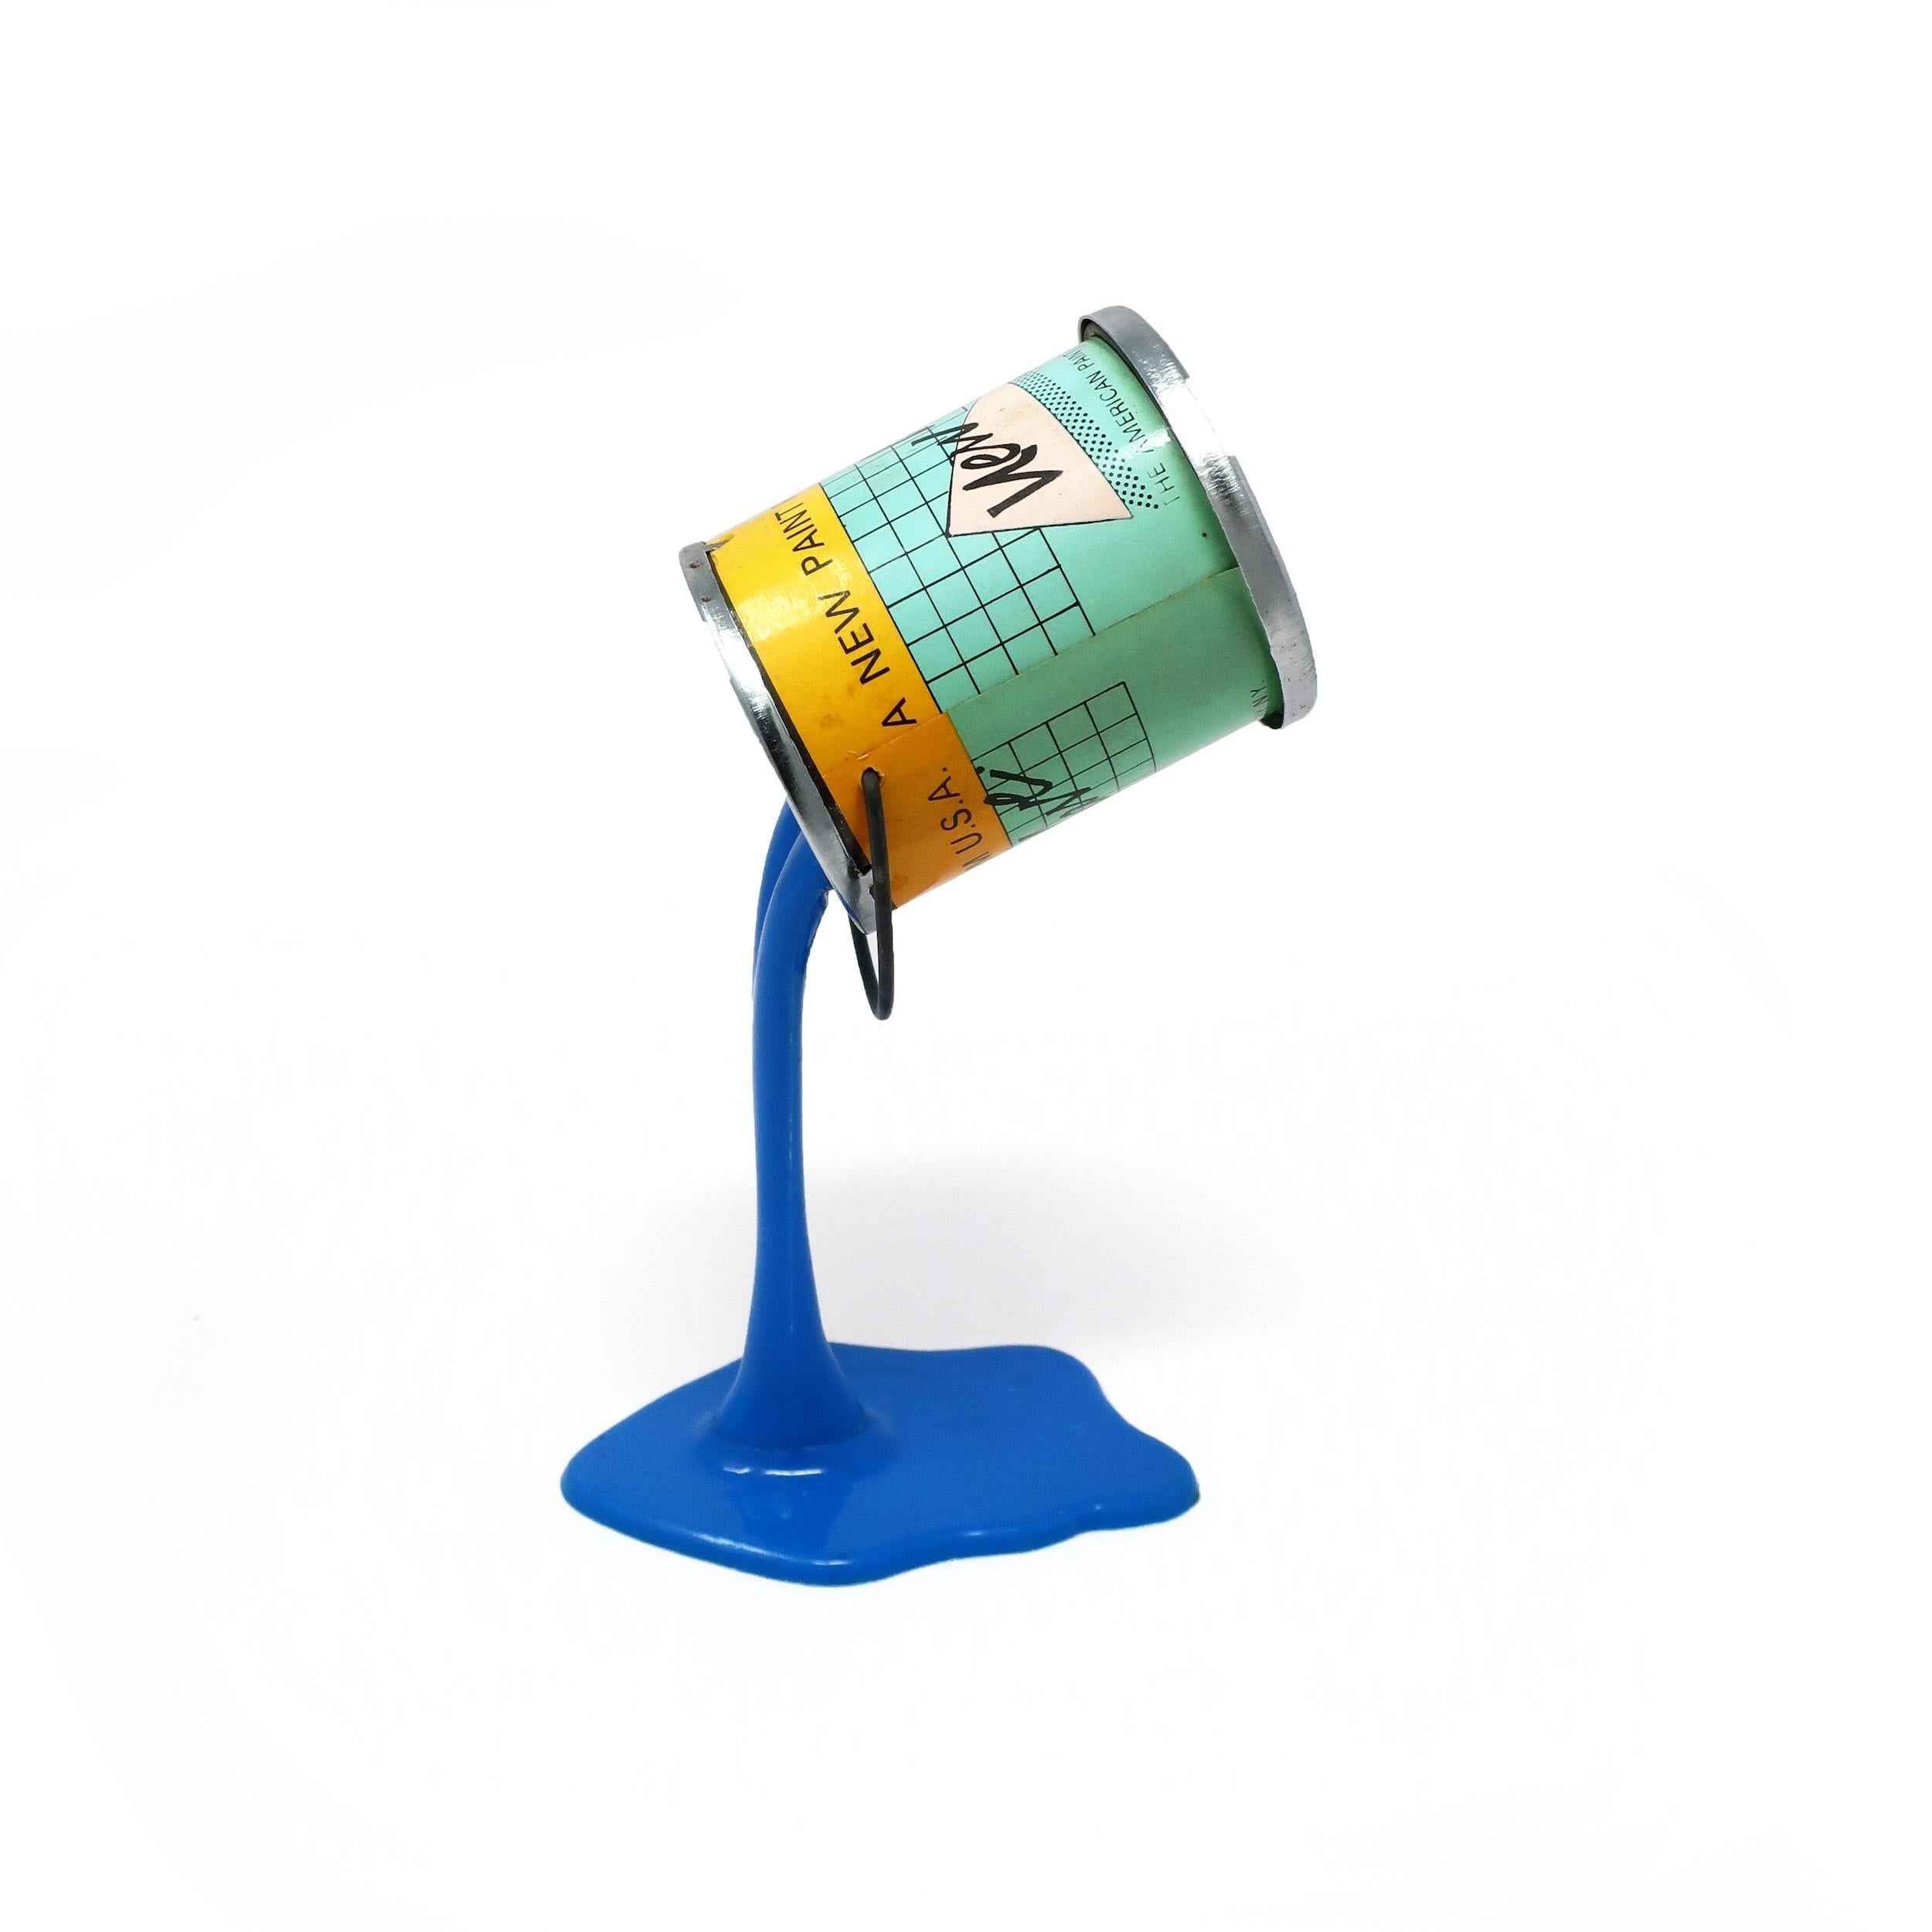 A perfectly Pop Art 1980s pouring paint can piggy bank/sculpture. Metal paint can with a quarter-sized coin slot in its bottom appears to be defying gravity by resting on a pouring stream of paint. Some people took the bottom off the paint can and